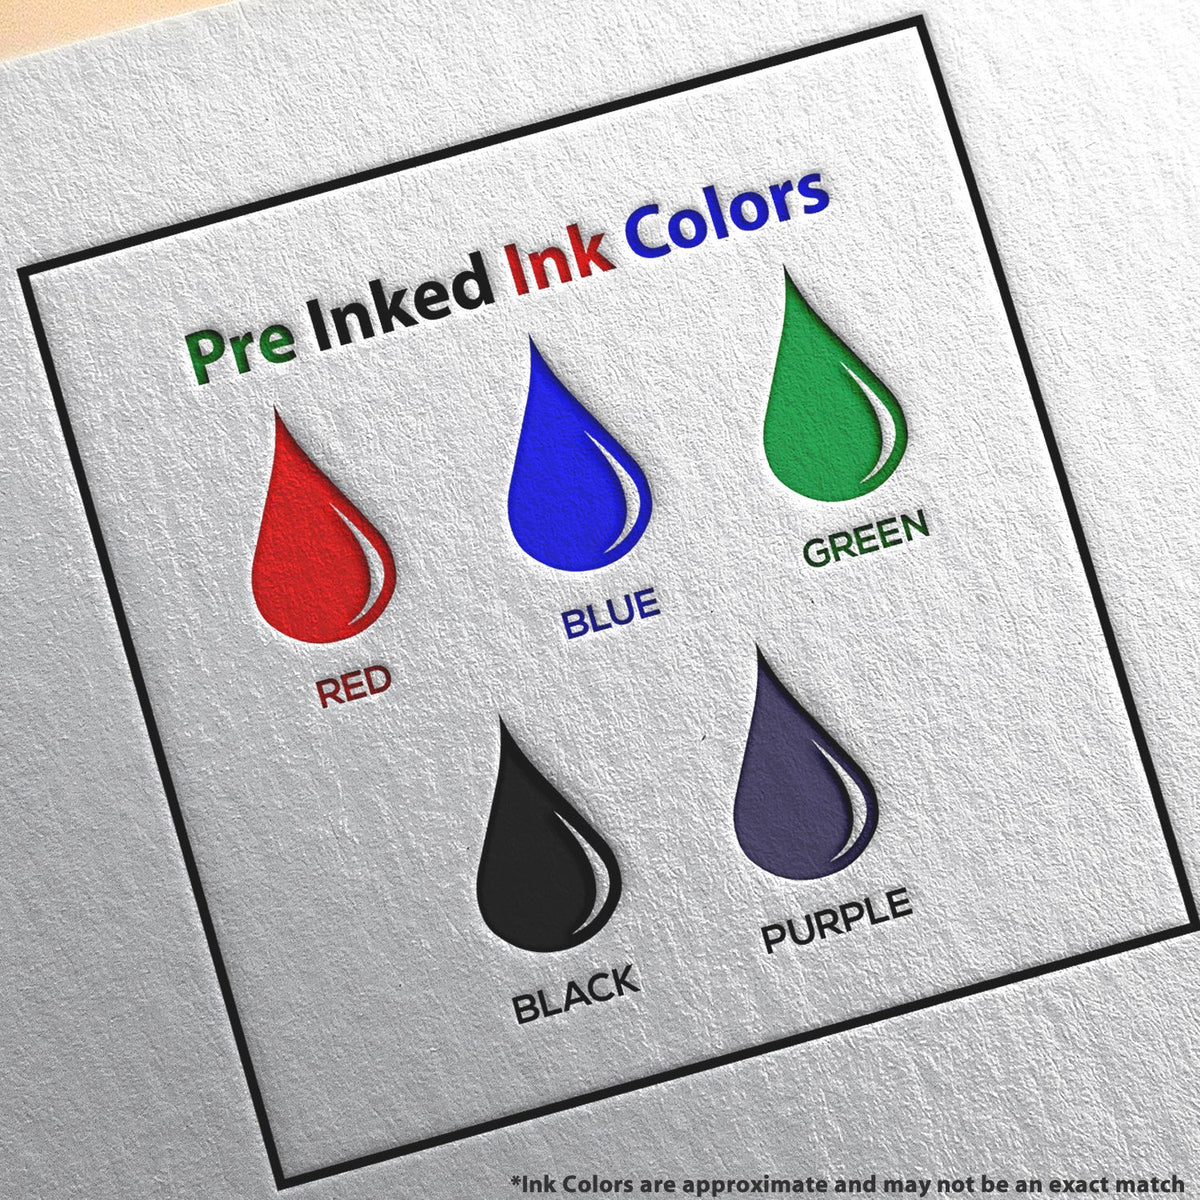 A picture showing the different ink colors or hues available for the Premium MaxLight Pre-Inked North Carolina Landscape Architectural Stamp product.